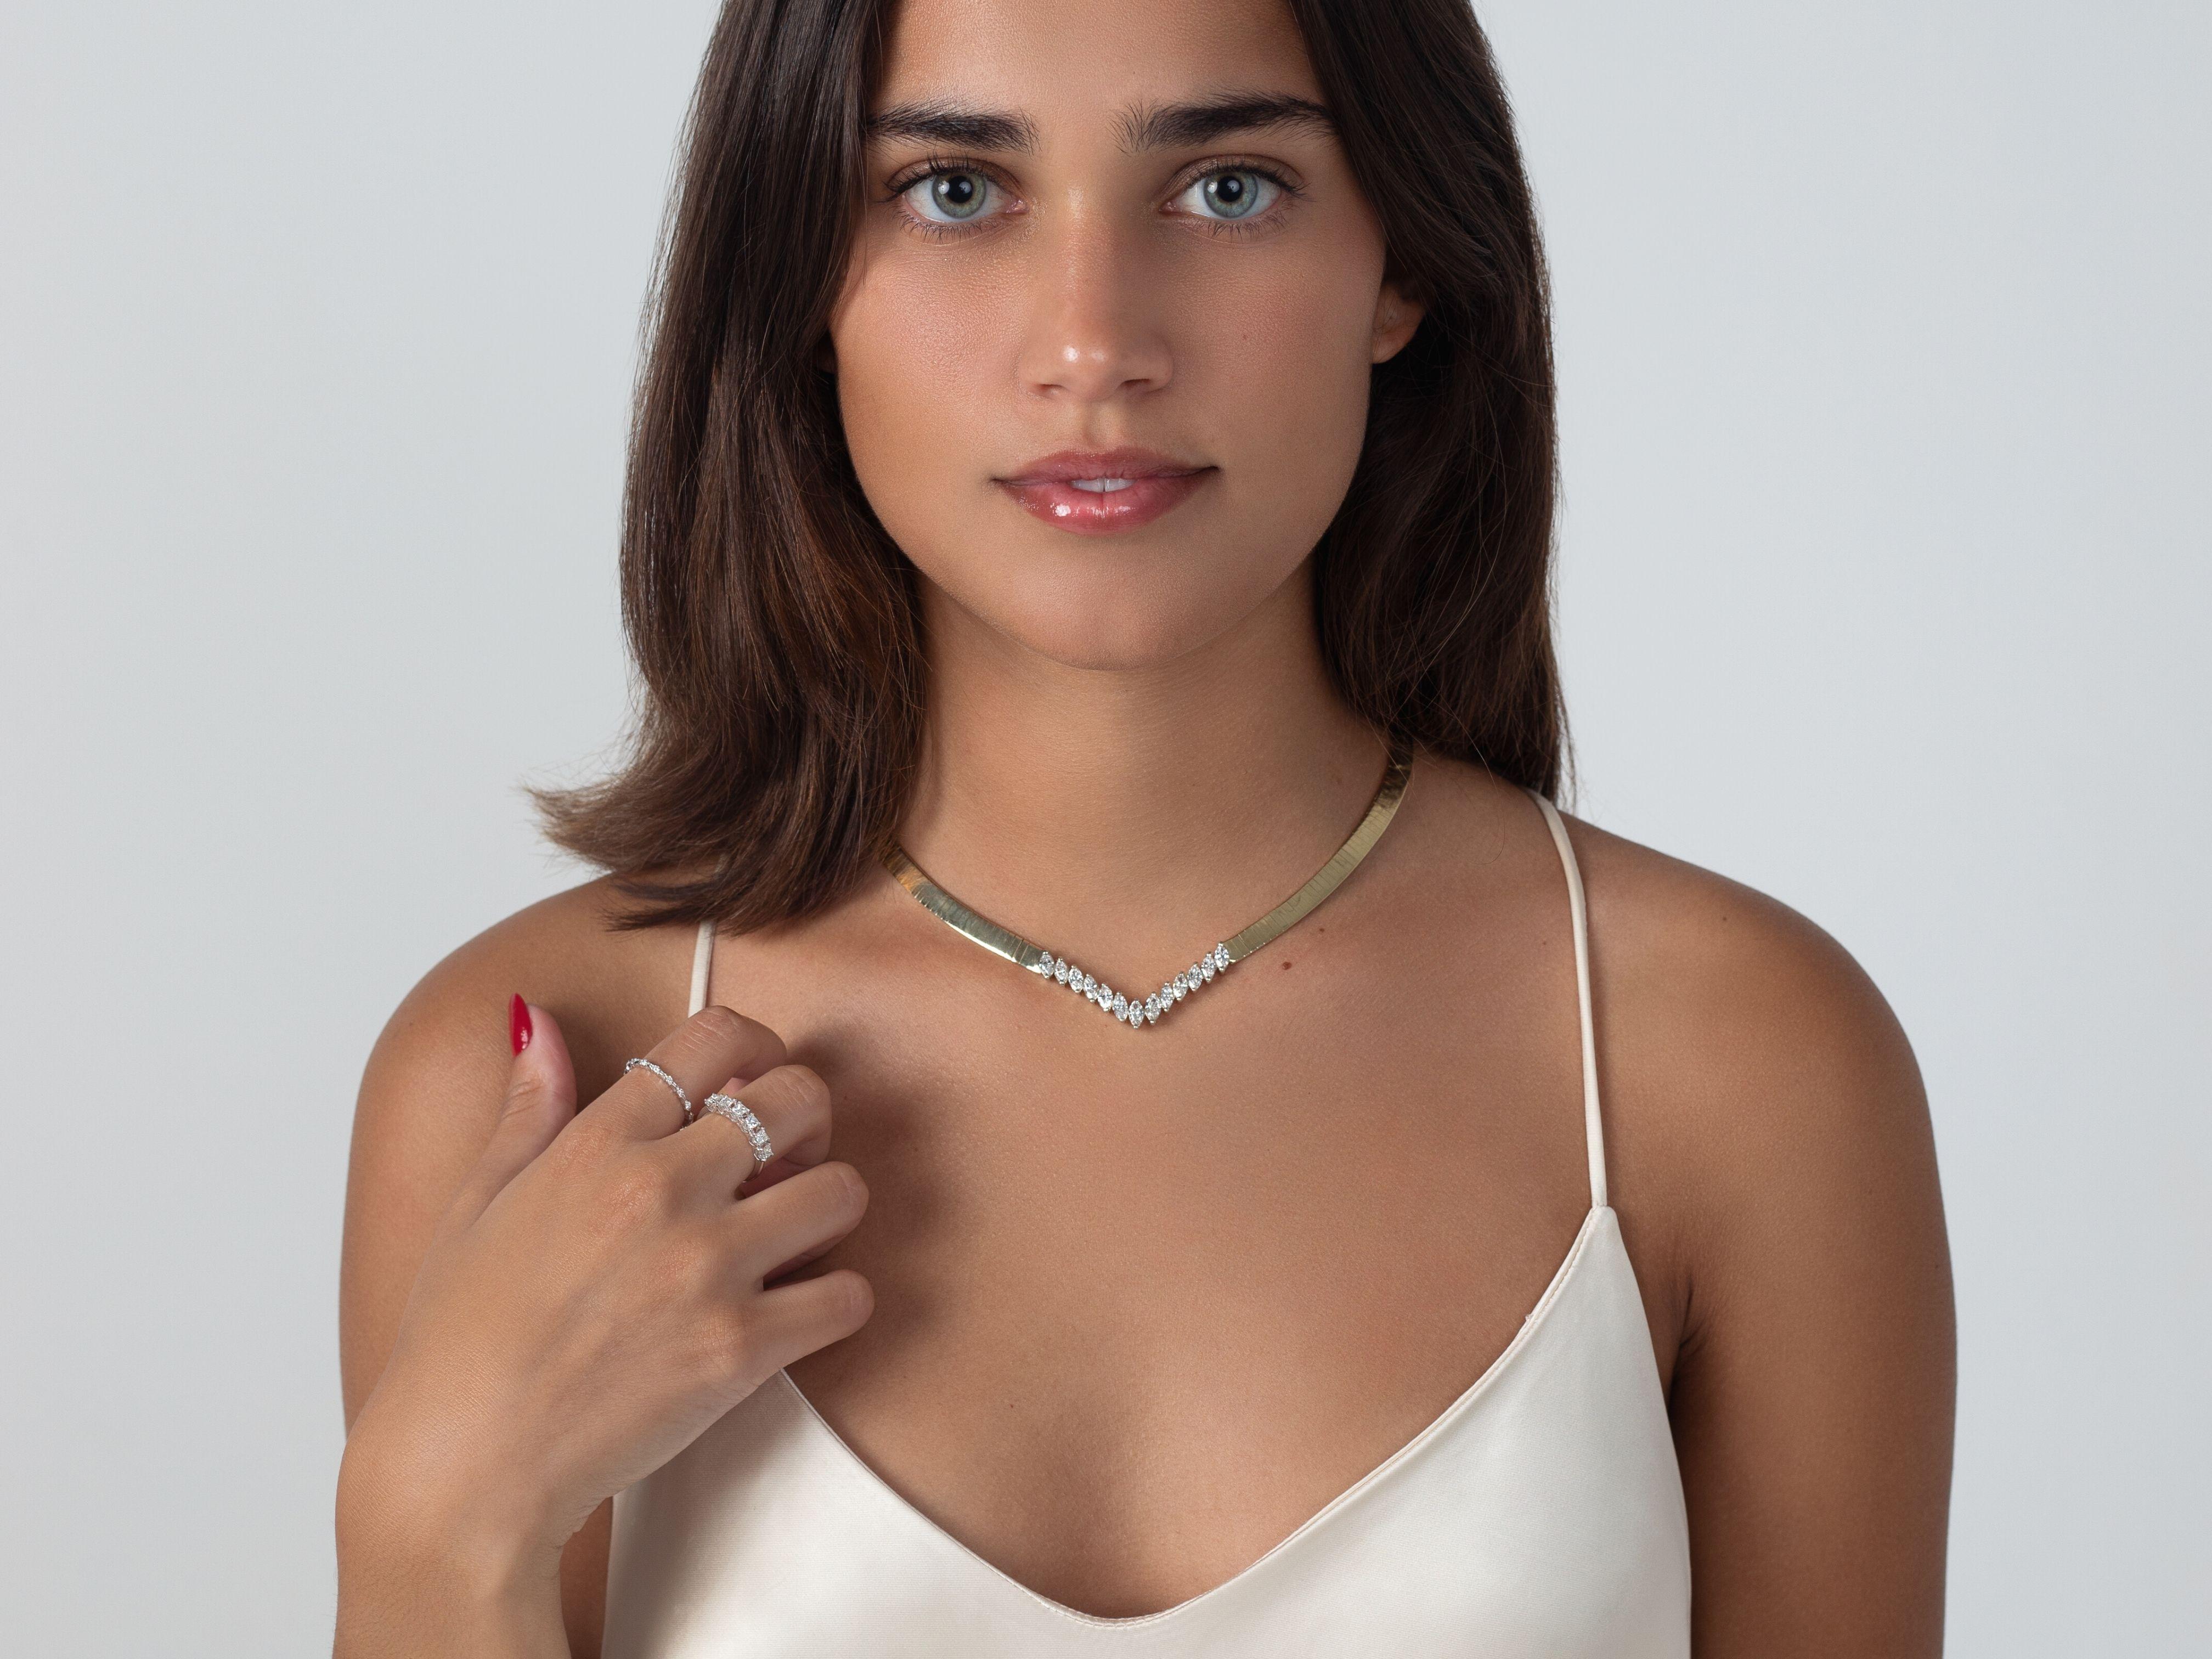 13 Marquis-Cut white diamonds totaling approximately 4.00 Carats and set in 39 grams of 14K solid yellow gold The diamonds are prong set and mounted in a gorgeous herringbone necklace that sits gracefully on the neckline. The diamonds are all